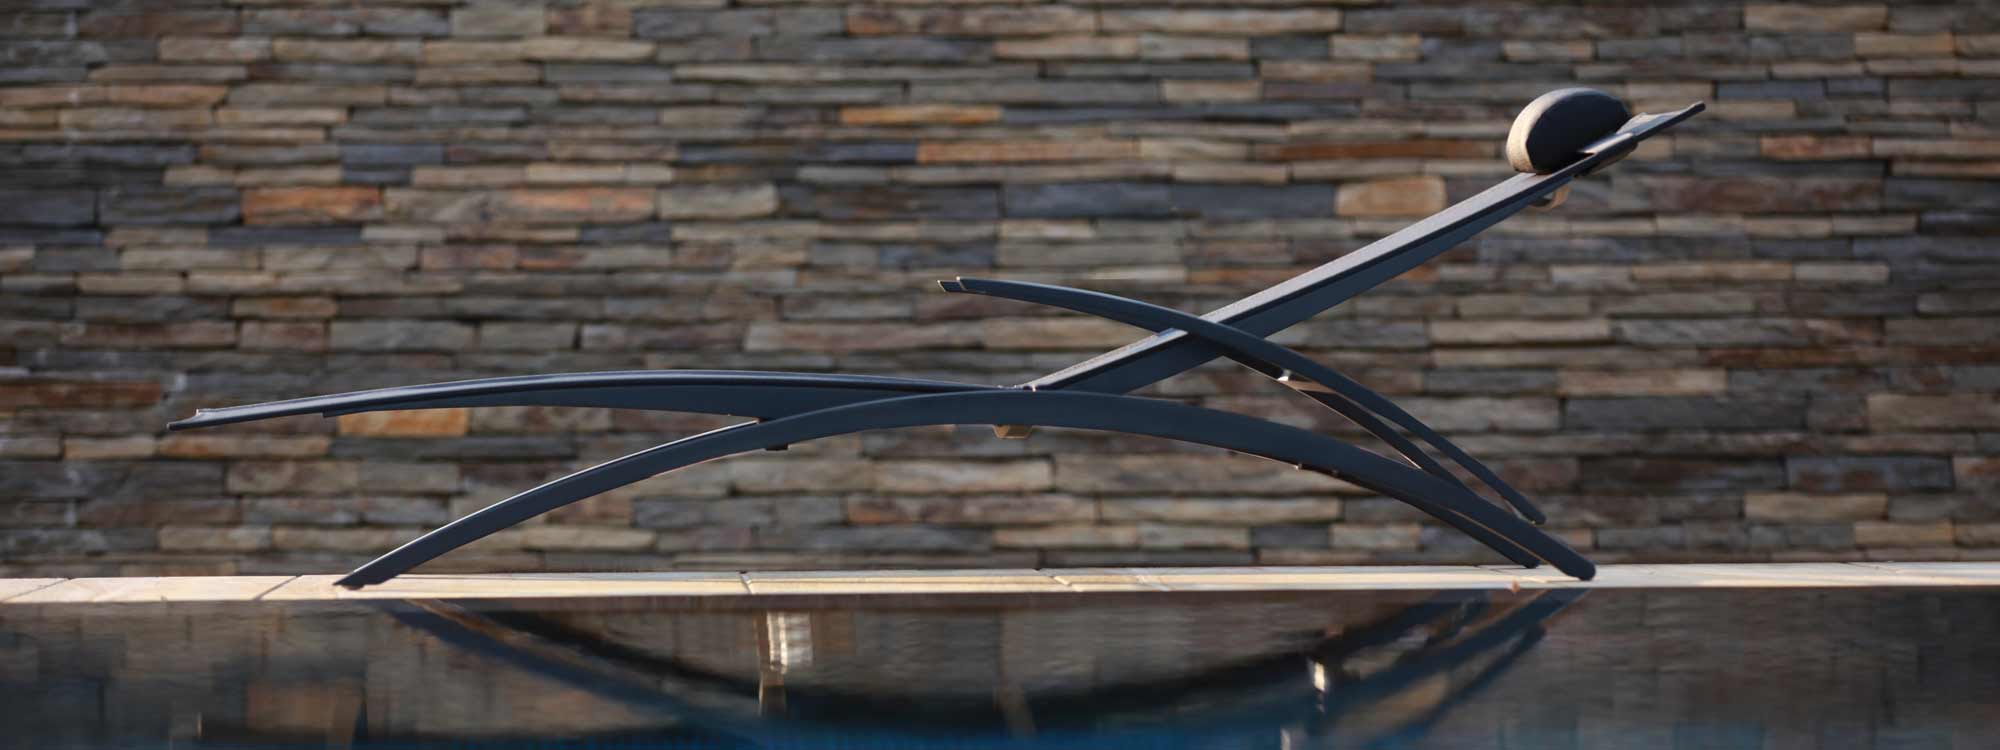 Image of Royal Botania OZN 195T black sun lounger on poolside with dry stone wall in background